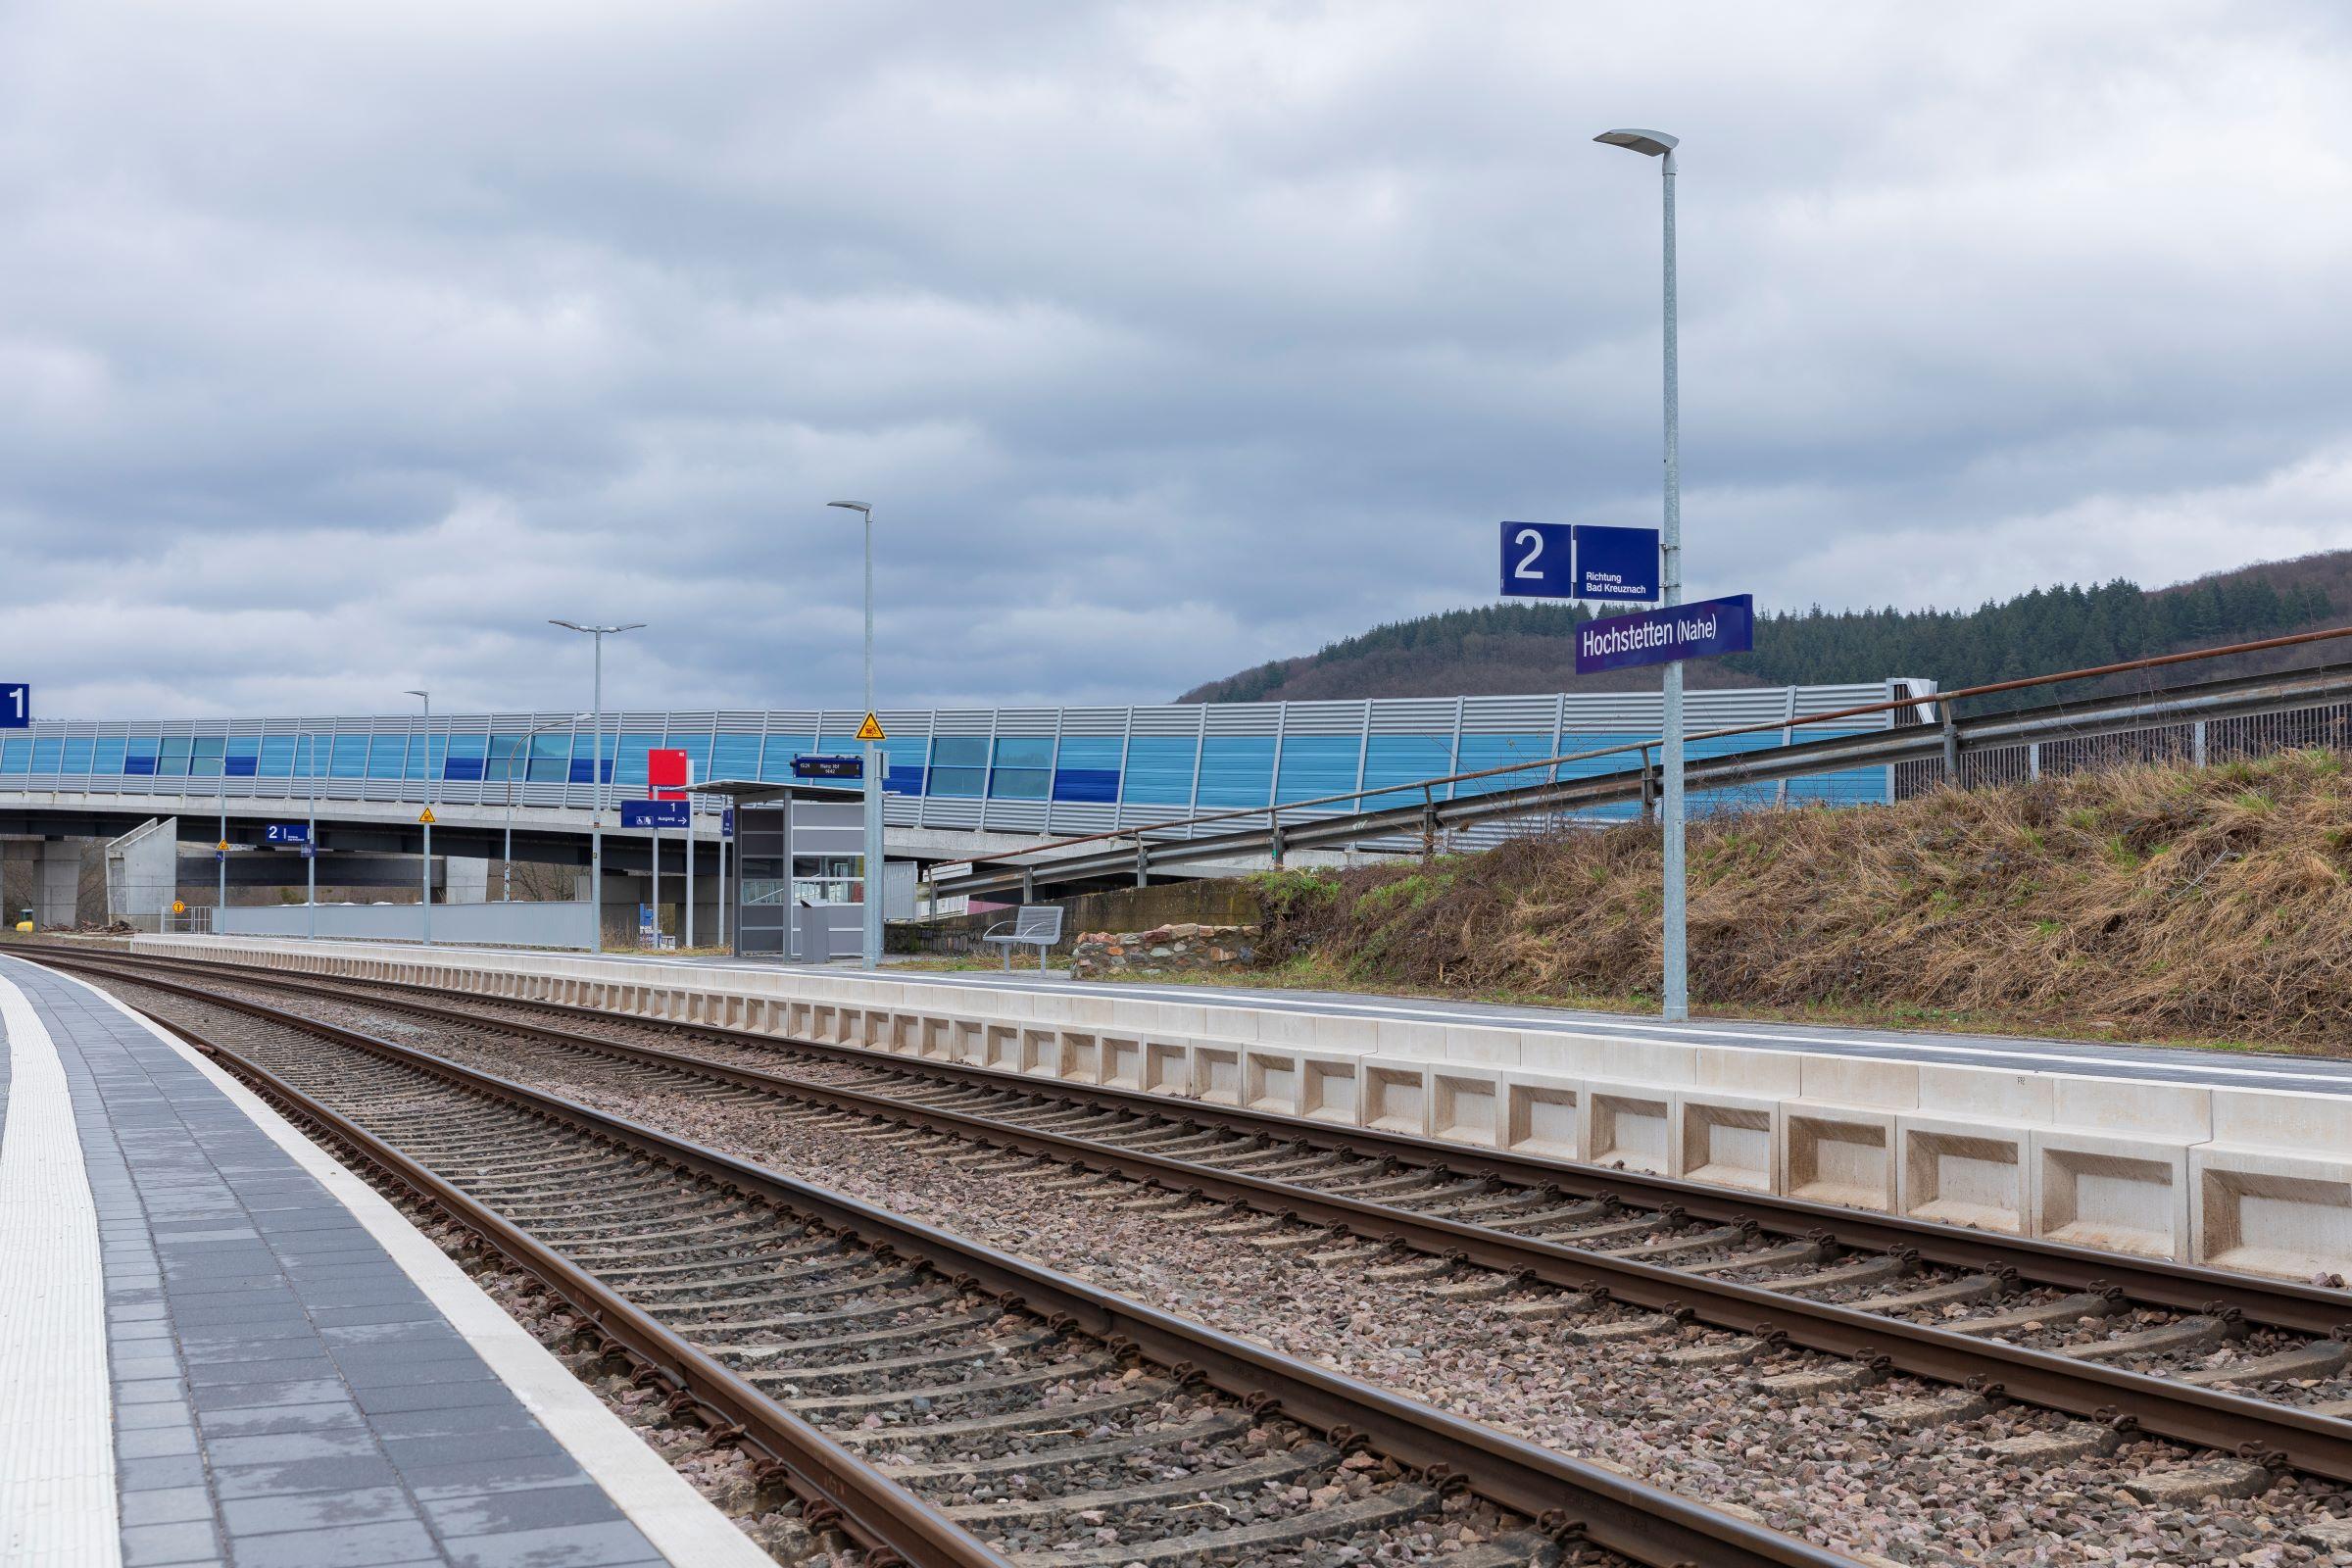 The modernised Hochstetten (Nahe) station with platforms at ground level, new weather shelters and new lighting.